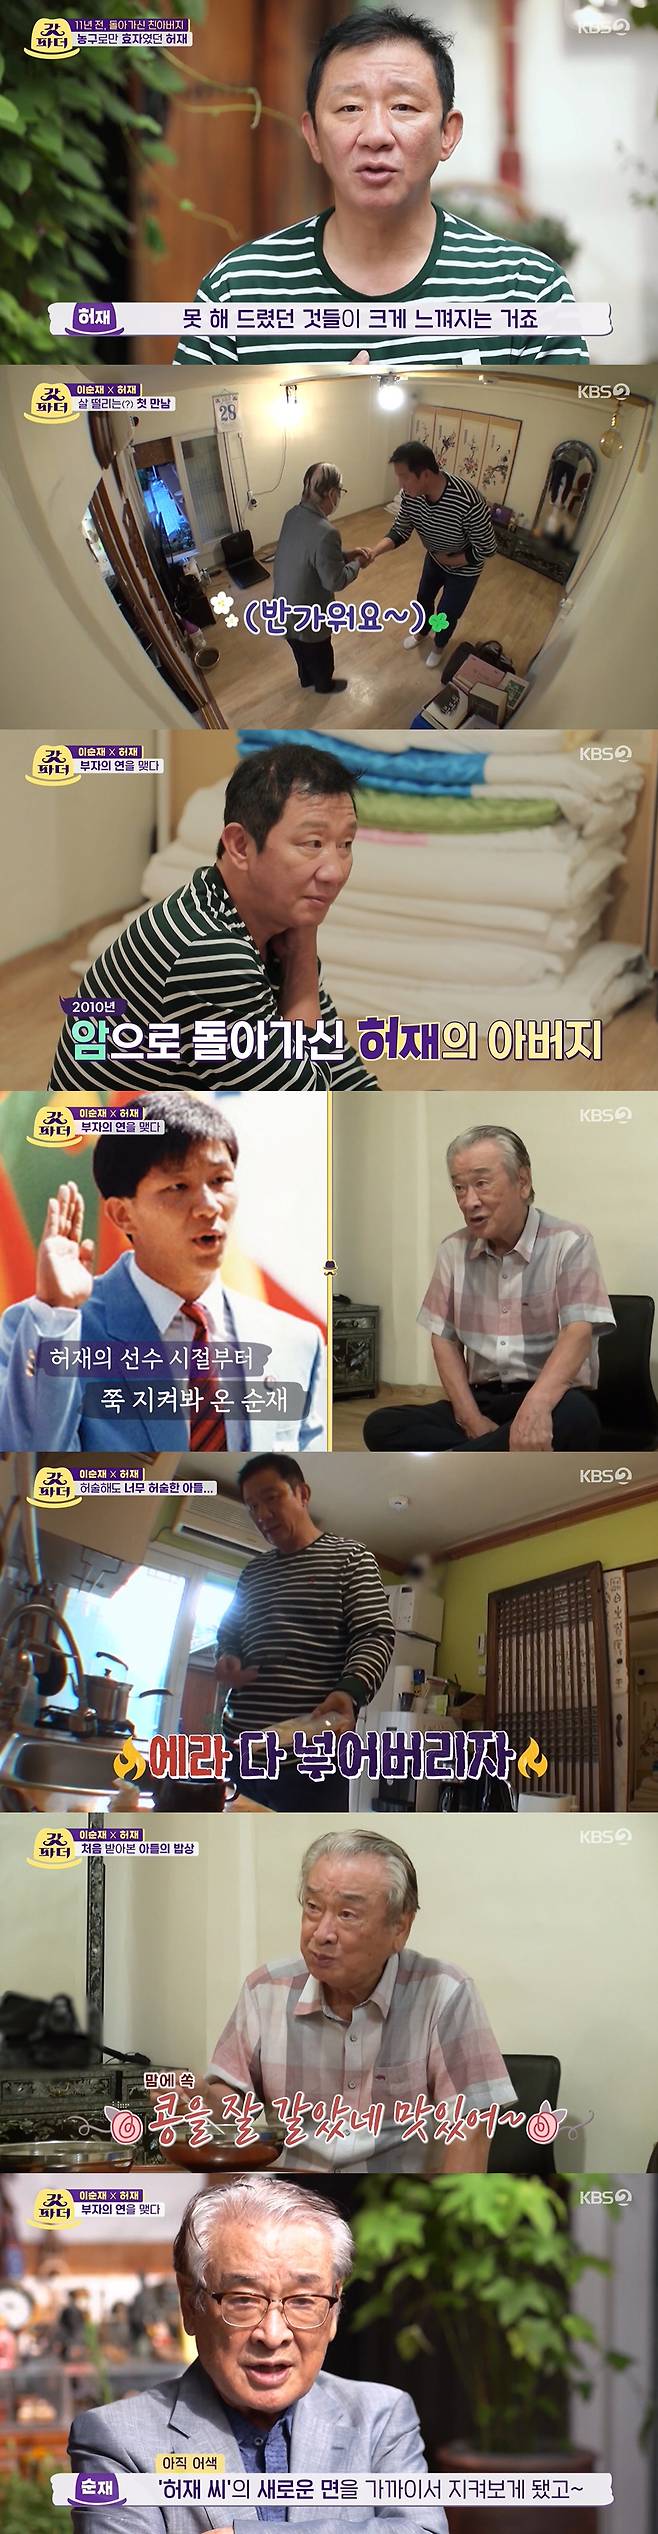 The Last Godfather created a virtual Wealthy relationship and opened the first broadcast song.In KBS2 The Last Godfather broadcast on the 2nd, the first meeting between Actor Kim Kap-soo and singer Jang Min-Ho, Actor Lee Soon-jae and former basketball player Hur Jae was drawn.Jang Min-Ho unveiled the luxury house; Jang Min-Ho said: My house is Incheon and my fathers house is Seoul.I thought it would be hard to move to Incheon every time, so I set up a house in Seoul. I got a house because I wanted to have a good house. Jang Min-Ho put his pictures all over the house and waited for his virtual father Kim Kap-soo.Jang Min-Ho explained, I think I can give my recognition that my house is my house if I put my stuff, but I have taken it.Actually Kim Kap-soo explained that there is only an only child without son, saying, I think there is a lot I can do with son, I want to be like Friend.Kim Kap-soo, who arrived at Jang Min-Hos house on a bike, tricked himself into saying Quick after ringing the bell.However, Jang Min-Ho did not recognize Kim Kap-soo and closed the door after greeting him.In fact, with the entrance cut, Kim Kap-soo laughed, saying, Thats him. He also said, It was embarrassing. I disguised myself to have fun.I thought Id just go. Kim Kap-soo again knocked on Jang Min-Hos house, but when he did not notice, he revealed his existence.If I really knew, I would have taken an action to go out, I never imagined it, said Jang Min-Ho.The two greeted me with a welcome greeting, and Jang Min-Ho showed Kim Kap-soo a Family Relationship Certificate and showed his intention to create a relationship with Wealthy on paper.Kim Kap-soo said that he and Jang Min-Ho are only 20 years old, and said, I could call you son, but I wanted you to call me father.Jang Min-Ho said, The real father is 40 years old from me, my father died in 2011, and it was the year my Trot debut album came out.He died a month or two ago when he could not see the album. He heard the song, but he did not see the stage. I had a lot of difference between my father and Age, so it was hard to work out together when I was a middle and high school student.I want to be a father like Friend. Kim Kap-soo also said, I wanted to be a father like my brother. In the meantime, Hur Jae found a lodging in Bukchon Hanok Village, which resembles his old house, and was soaked in memories, and then he began to organize and prepare to meet someone.It was to meet my virtual father Lee Soon-jae, who said, I dont seem to do well except basketball, I have not visited my father often with many excuses.I feel a lot of things that I did not after I died 11 years ago. He recalled the past before meeting Lee Soon-jae (Lee Soon-jae) Ive been on TV a lot; its the first time Ive actually seen it, but its Feelings that Ive met often.Rather, it seems to be easier to call it my father than the title of teacher. Lee Soon-jae arrived earlier than expected by Hur Jae and began to clear up his luggage.Hur Jae greeted Lee Soon-jae and offered a Family relationship certificate that he had prepared, saying, I want to call you father comfortably.If my father was alive, he was 92. He died of cancer. He had many things he didnt do.I wanted to see my teacher, but I want to have this opportunity and be comfortable like my father. Lee Soon-jae smiled, saying, I have a strong son.Hur Jae, who went to the kitchen to boil the caustic tea for Lee Soon-jae, showed a fuss about putting all the caustics in the kettle about 50 times.Fortunately, Lee Soon-jae thanked the caustic tea for its taste, saying it was fine; Hur Jae also used millstones to make bean noodles, but the time was delayed and he was nervous.In the end, Hur Jae, using a blender rather than a millstone, succeeded in making soybean noodles in four hours; Lee Soon-jae said, Ive ground the beans well.Its delicious, and Hur Jae laughed brightly.